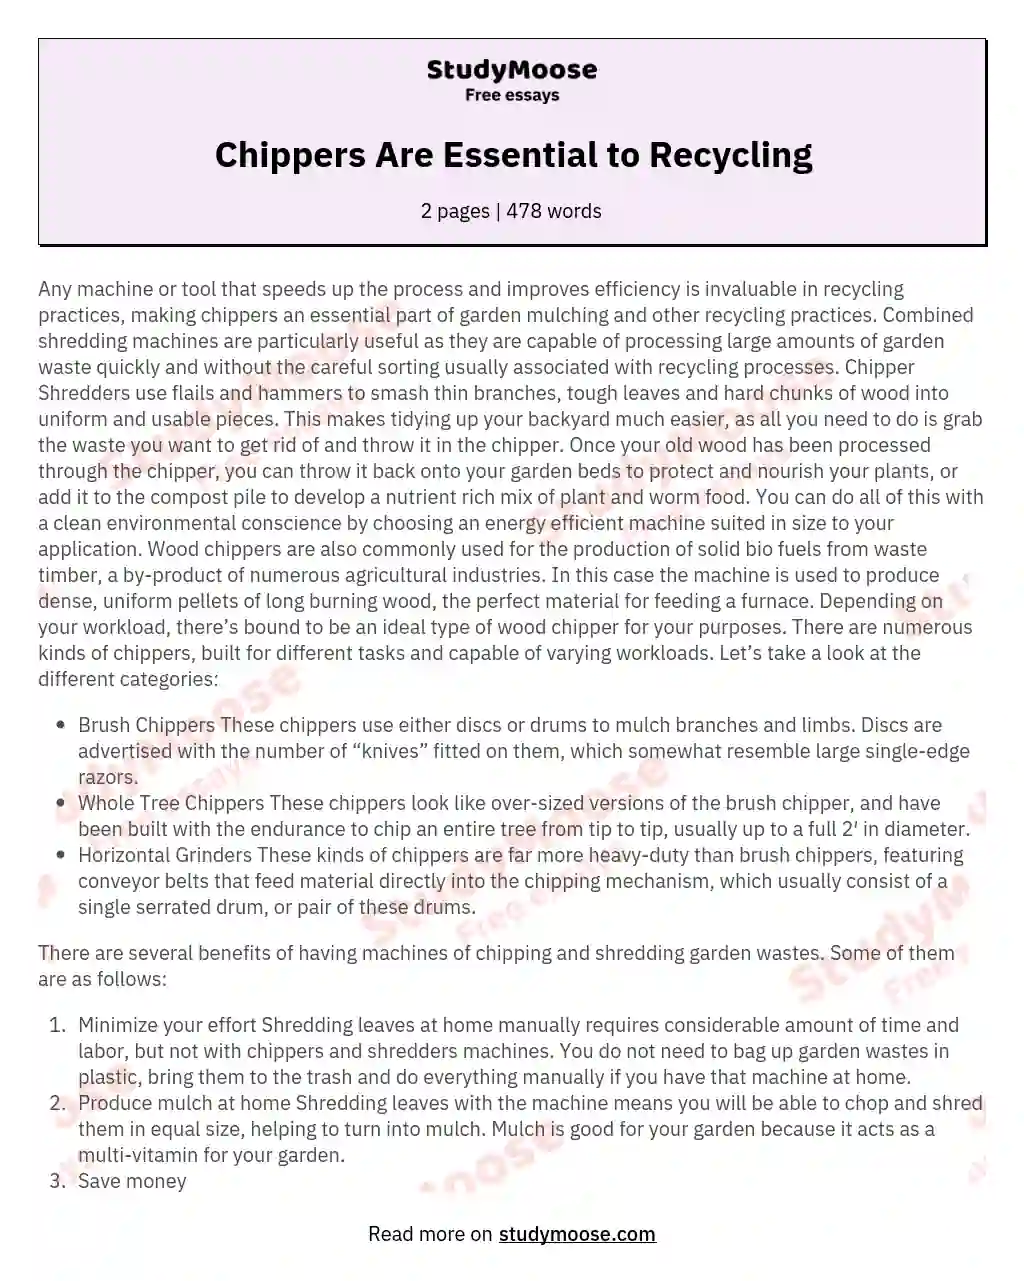 Chippers Are Essential to Recycling essay